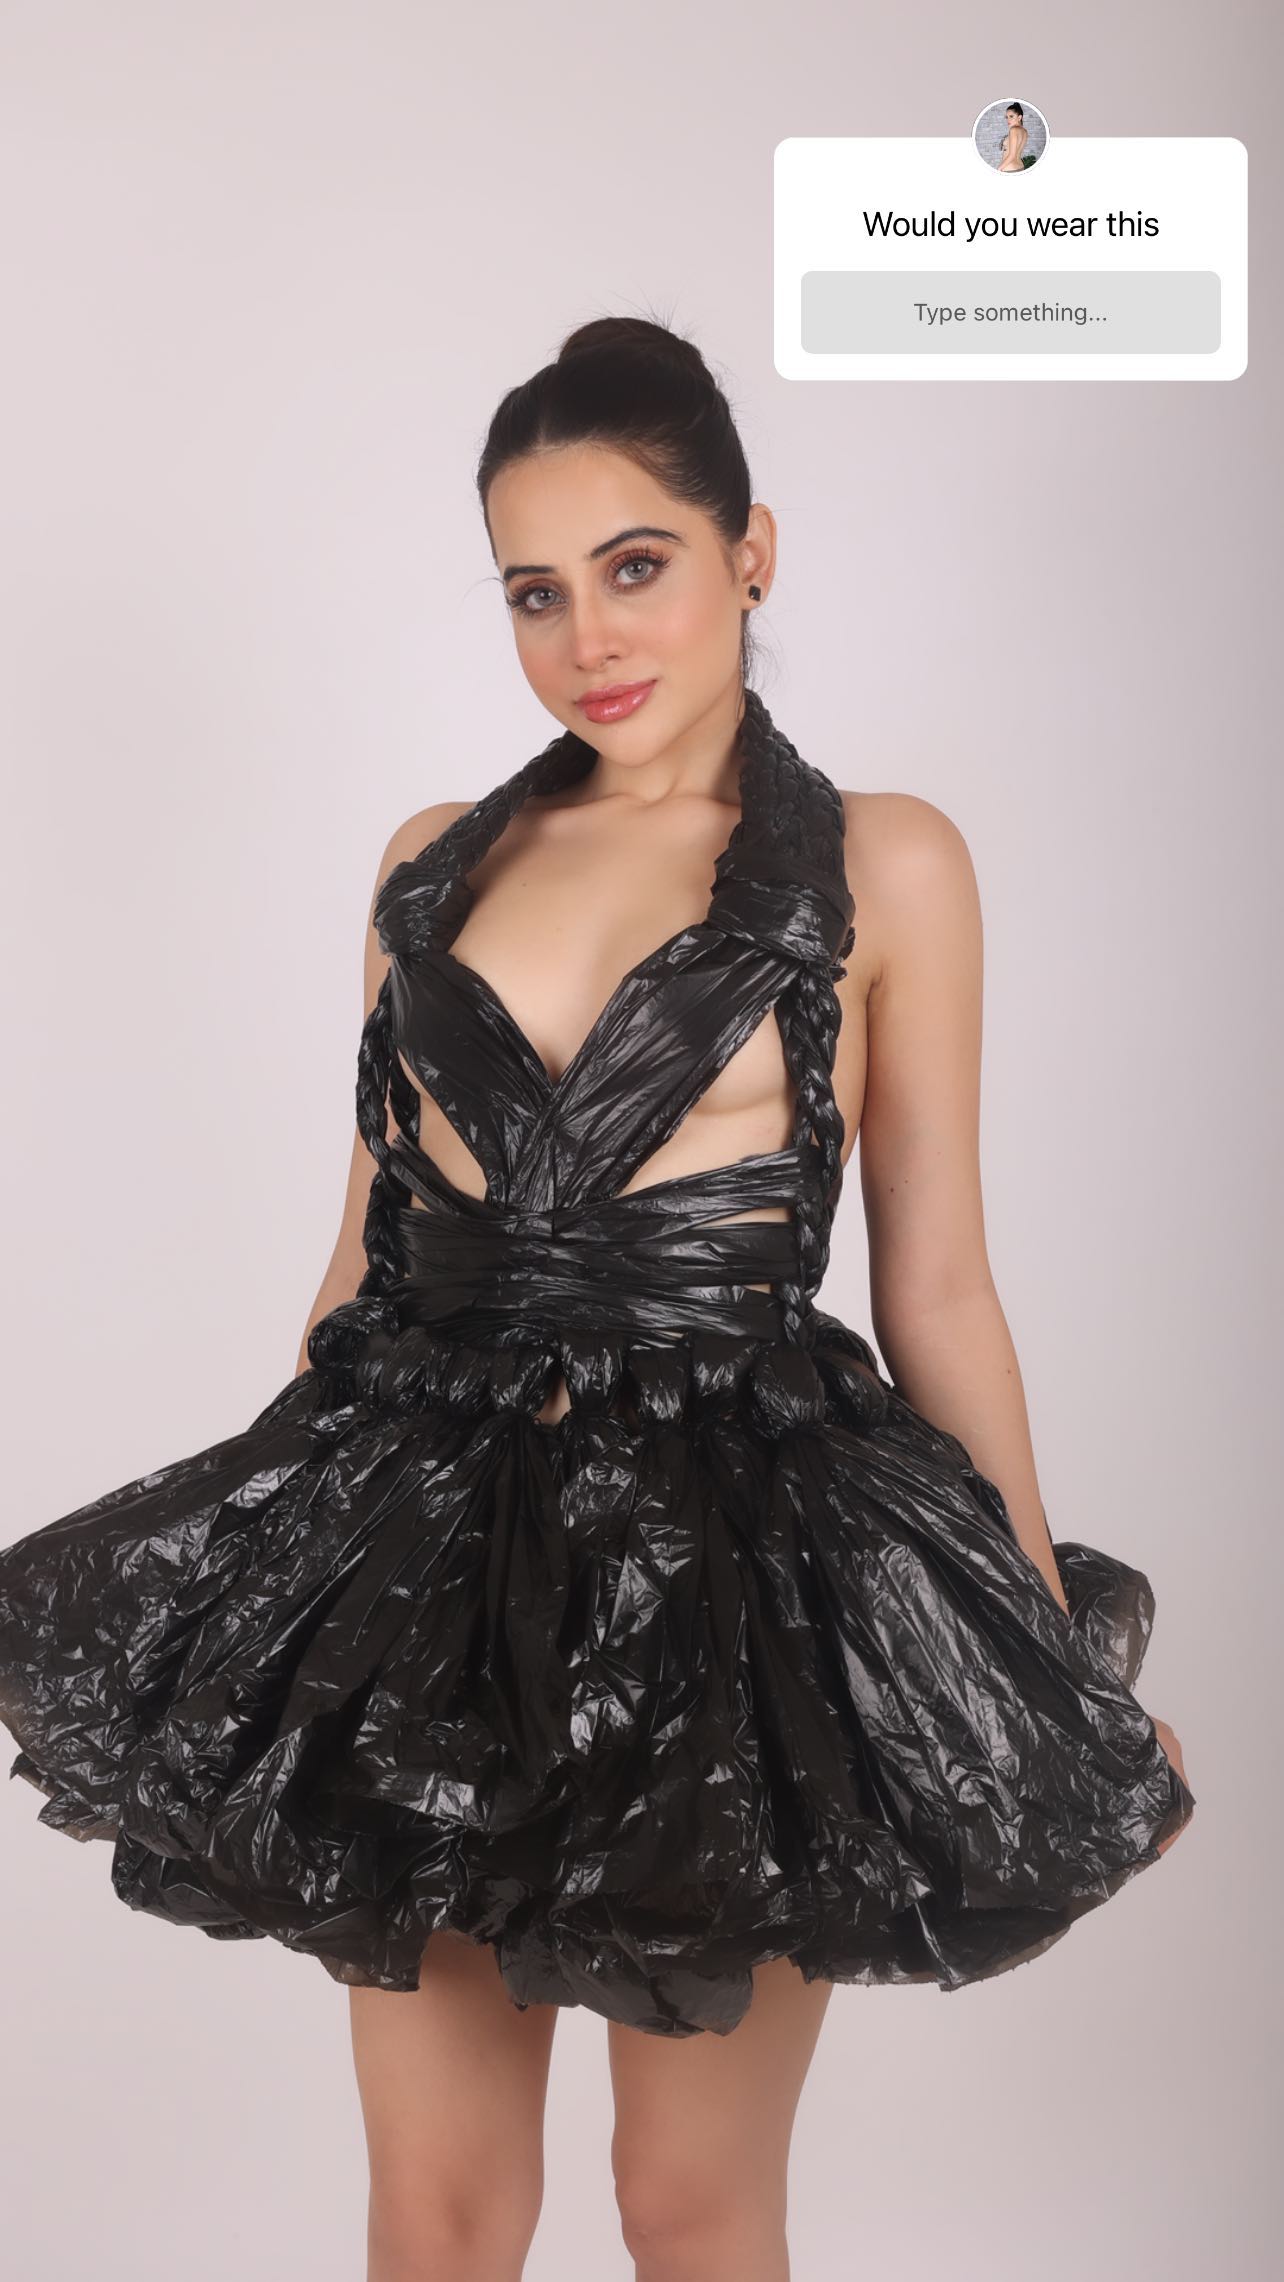 Uorfi Javed Says Can Wear Her Garbage Bag Outfit To Red Carpet